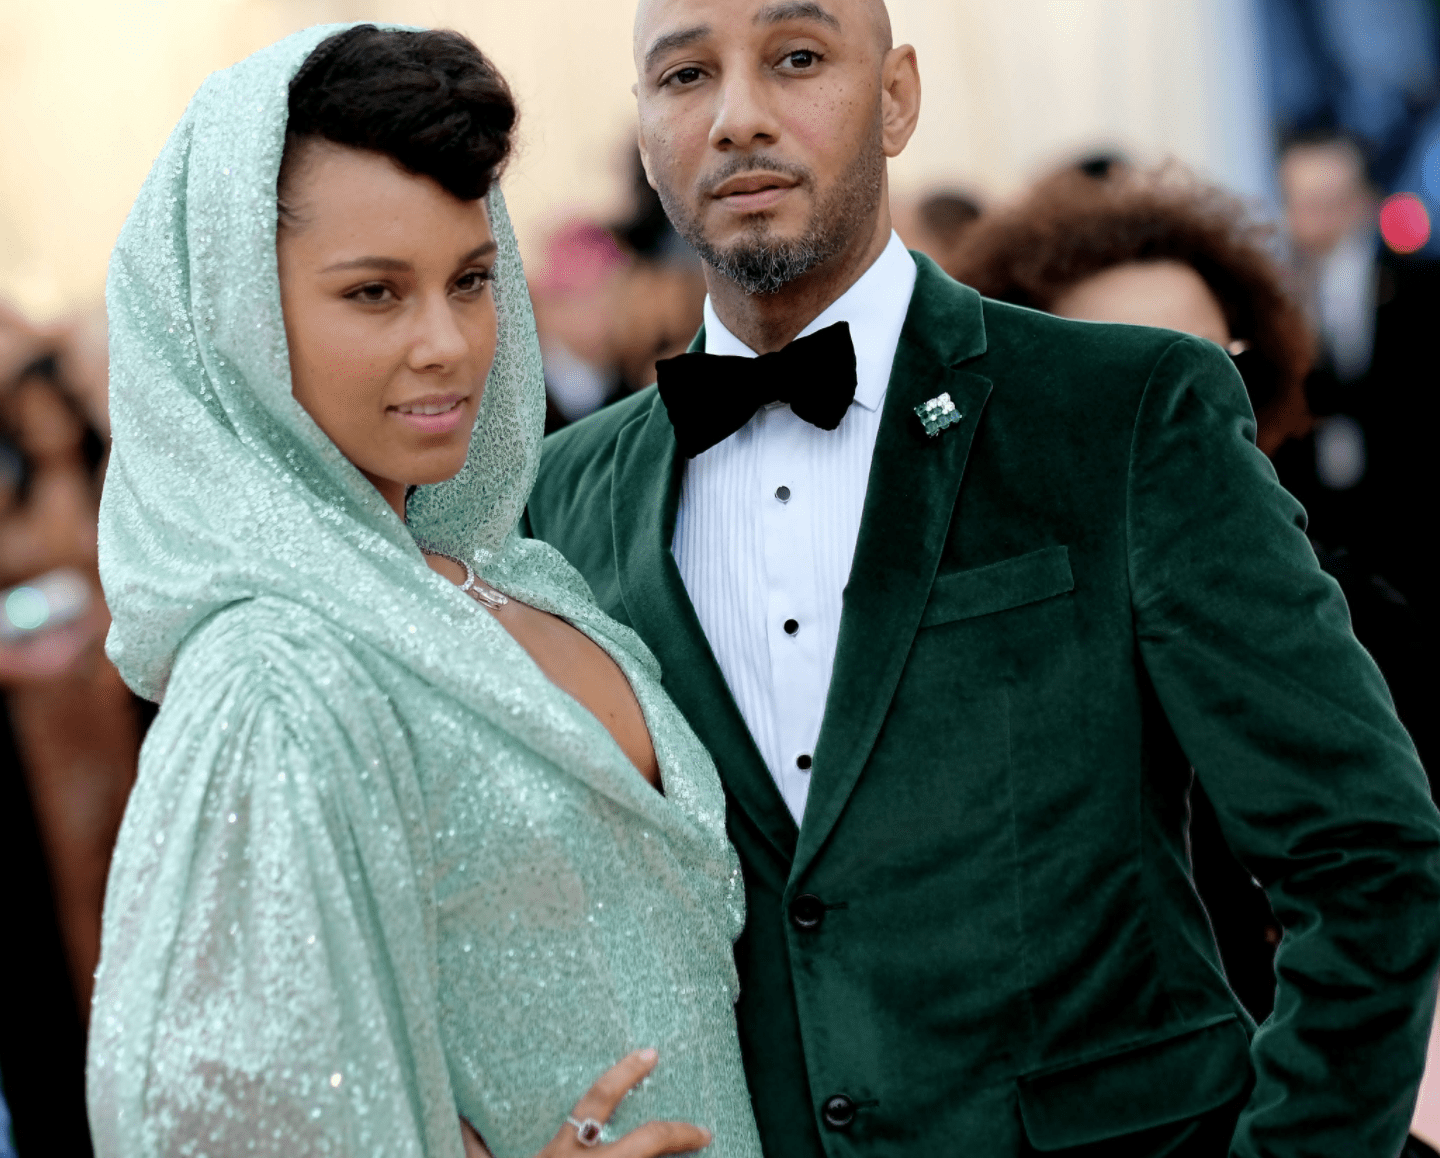 Alicia Keys and Swizz Beatz at the 2019 Met Gala at the Metropolitan Museum of Art in 2019. | Source: Getty Images